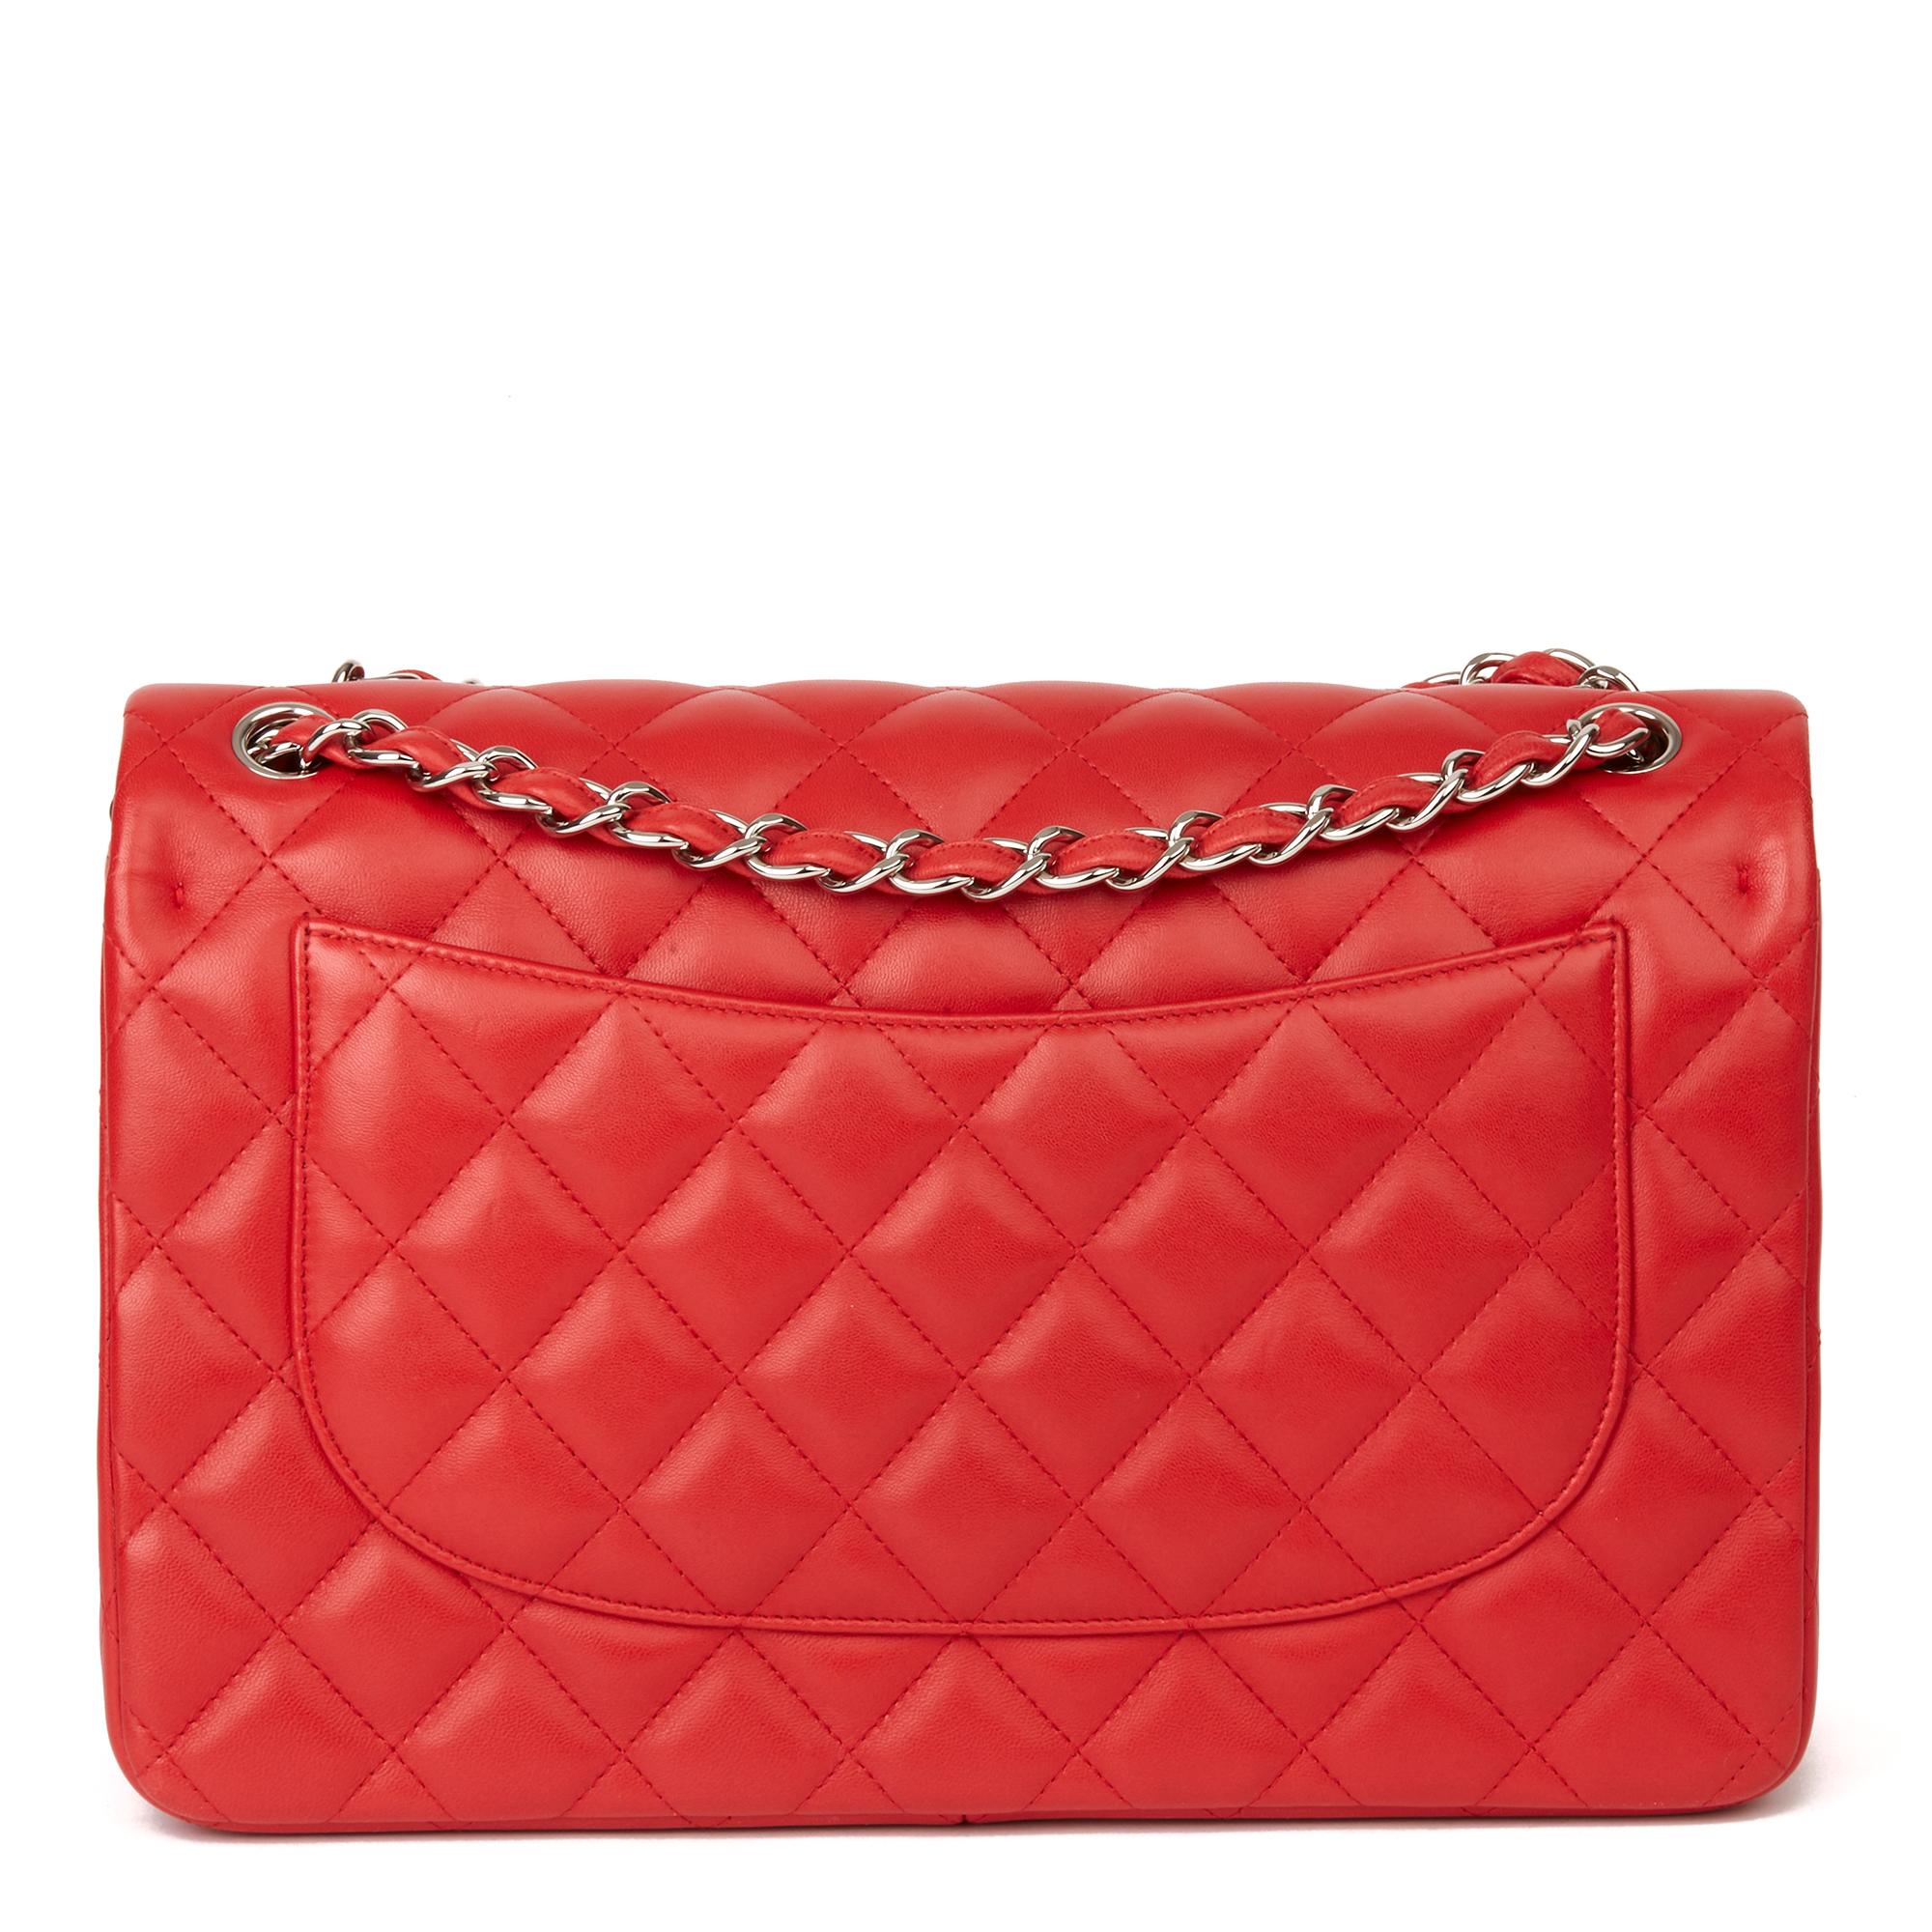 2014 Chanel Red Quilted Lambskin Jumbo Classic Double Flap Bag 1